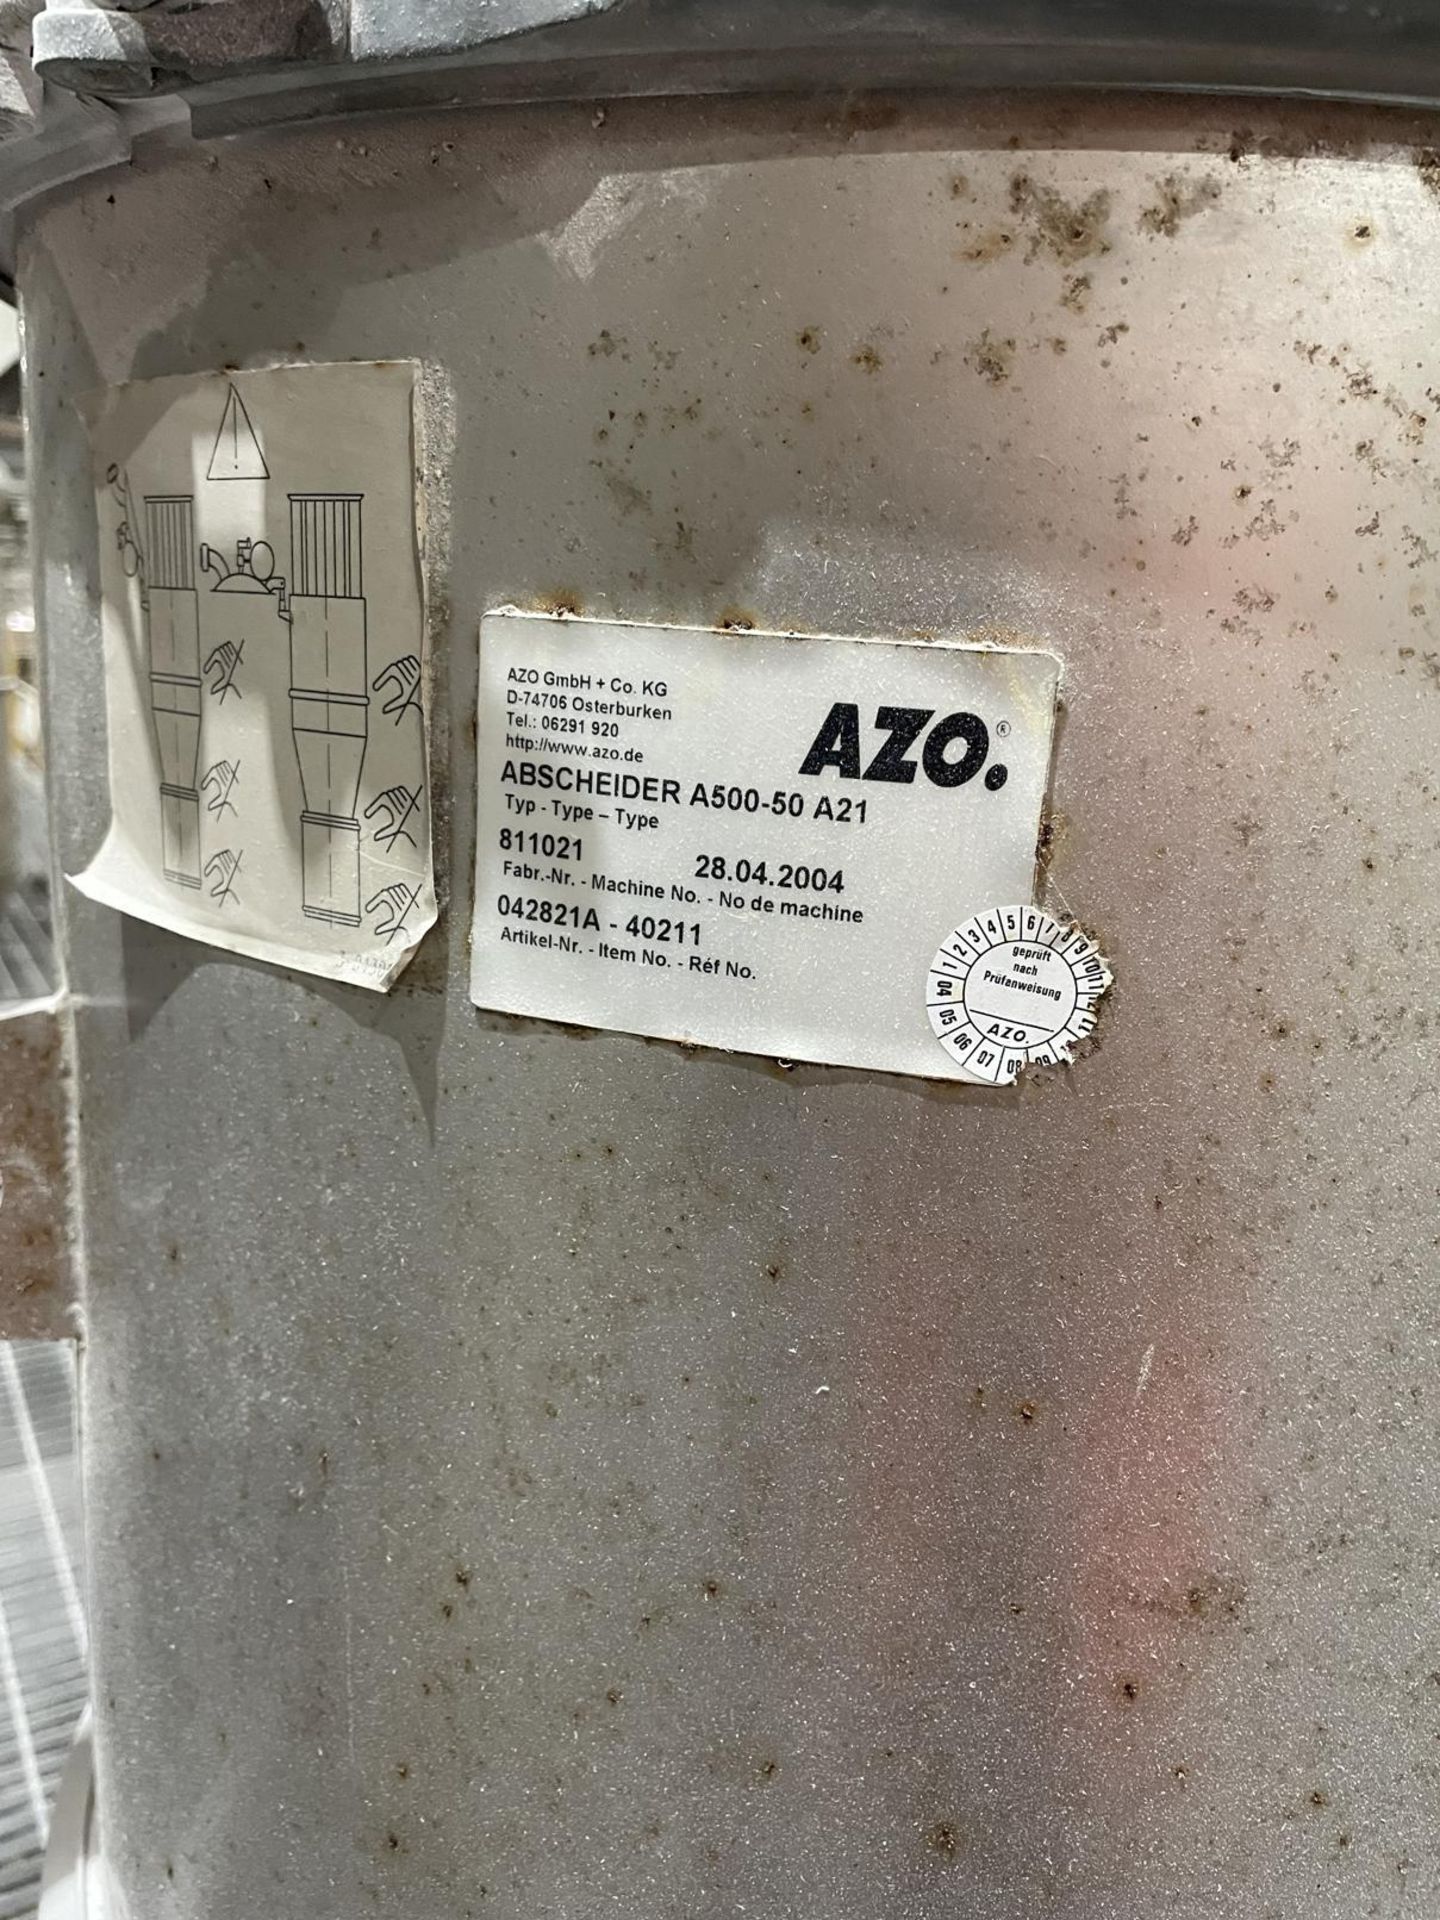 AZO Abscheider A500-50-A21 Raw Material Hopper FeedRAMS To Be Approved Before Removal - Image 2 of 2